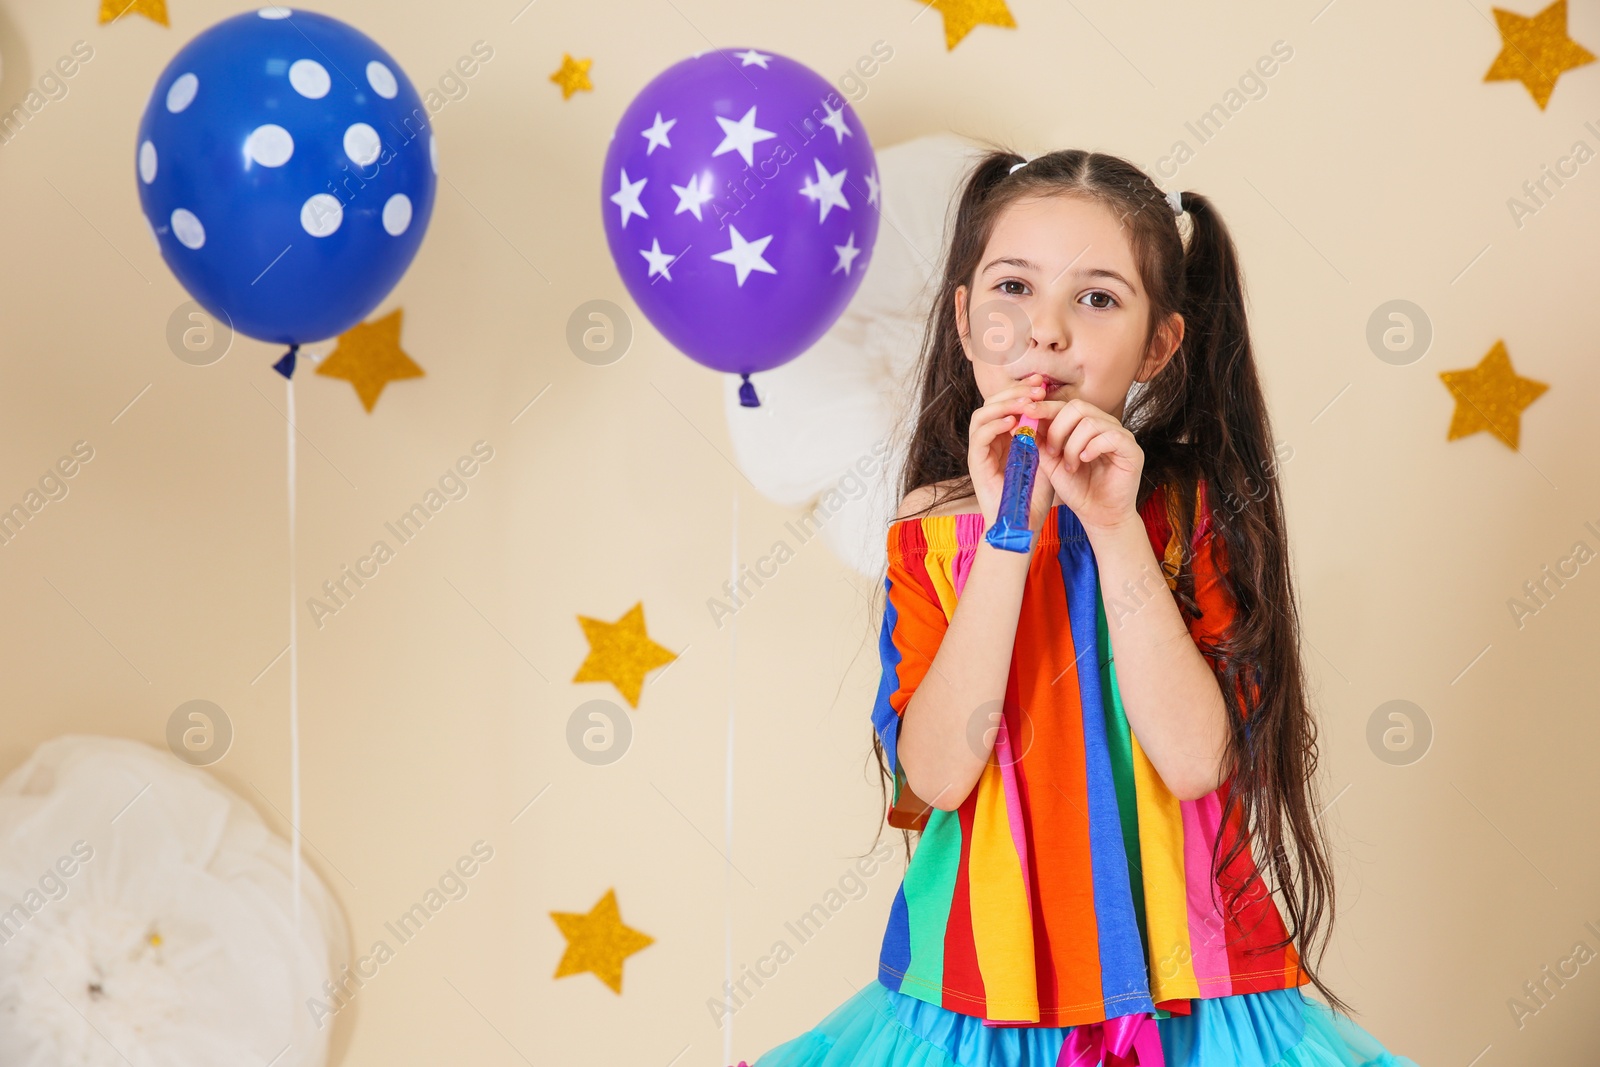 Photo of Adorable girl with party blower and decor for birthday celebration on color background